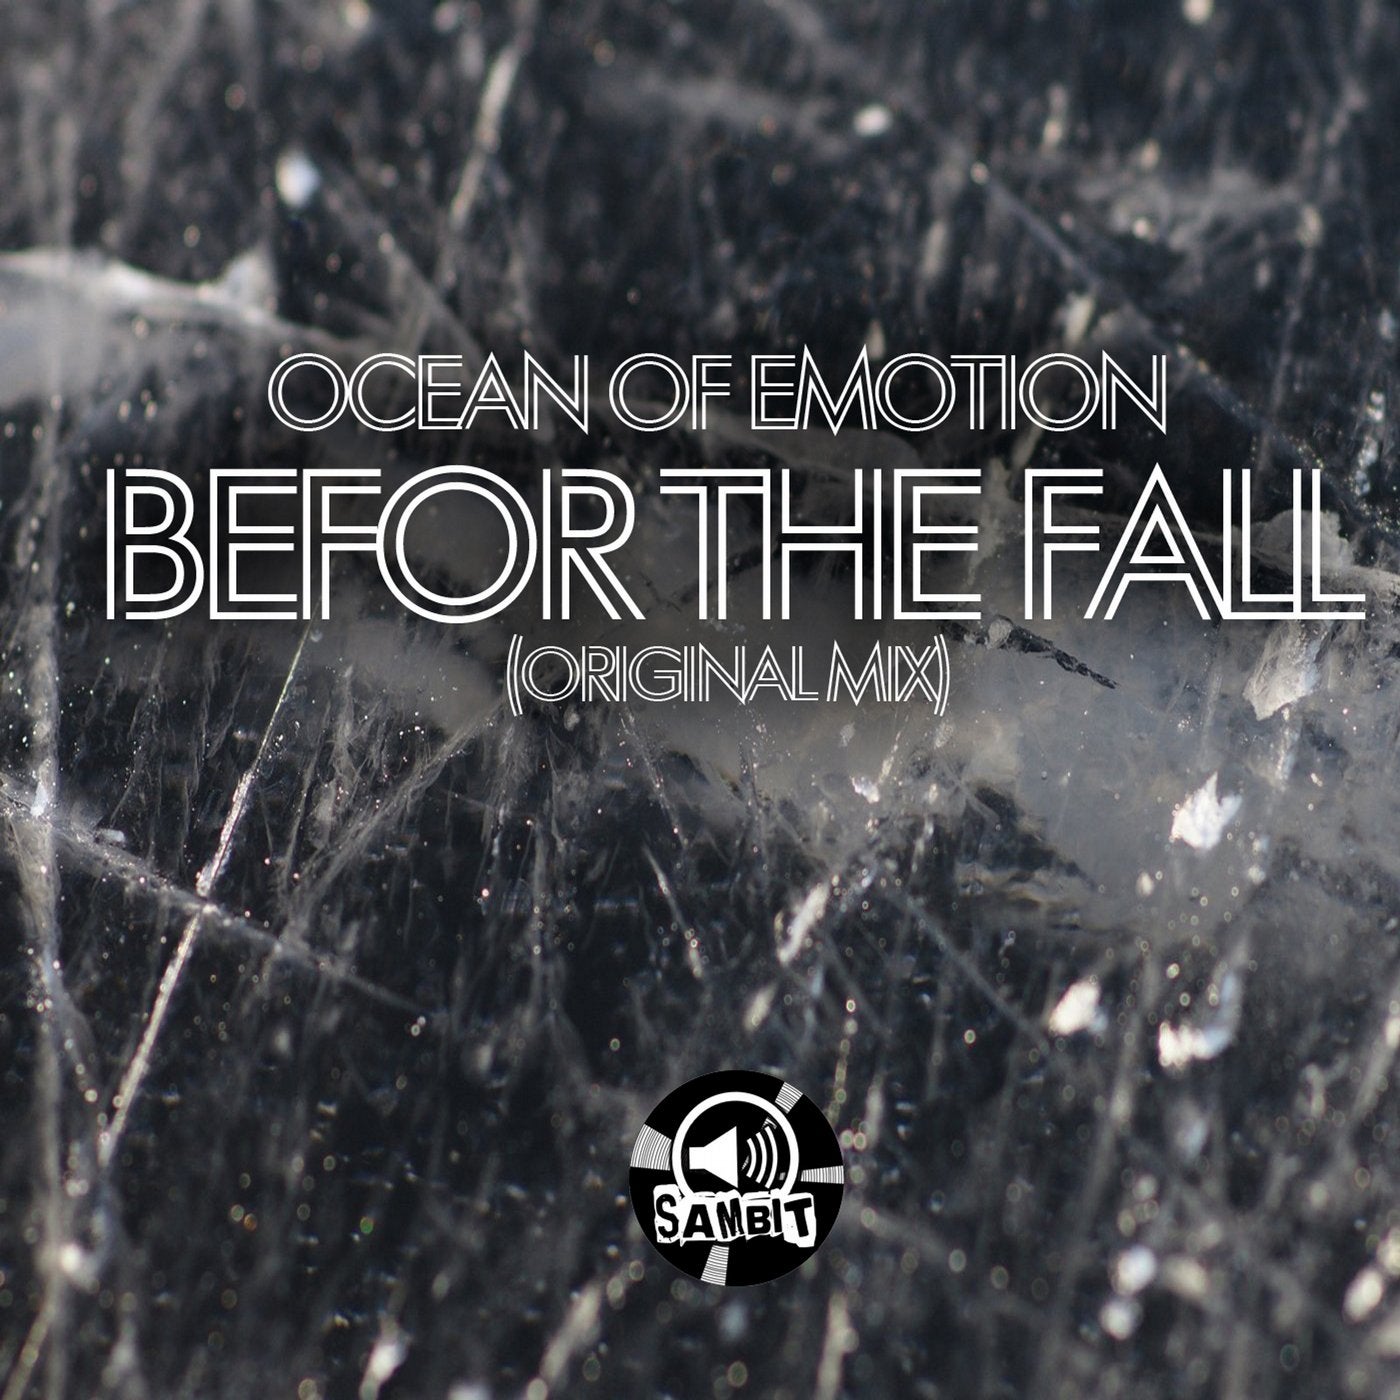 Befor the Fall